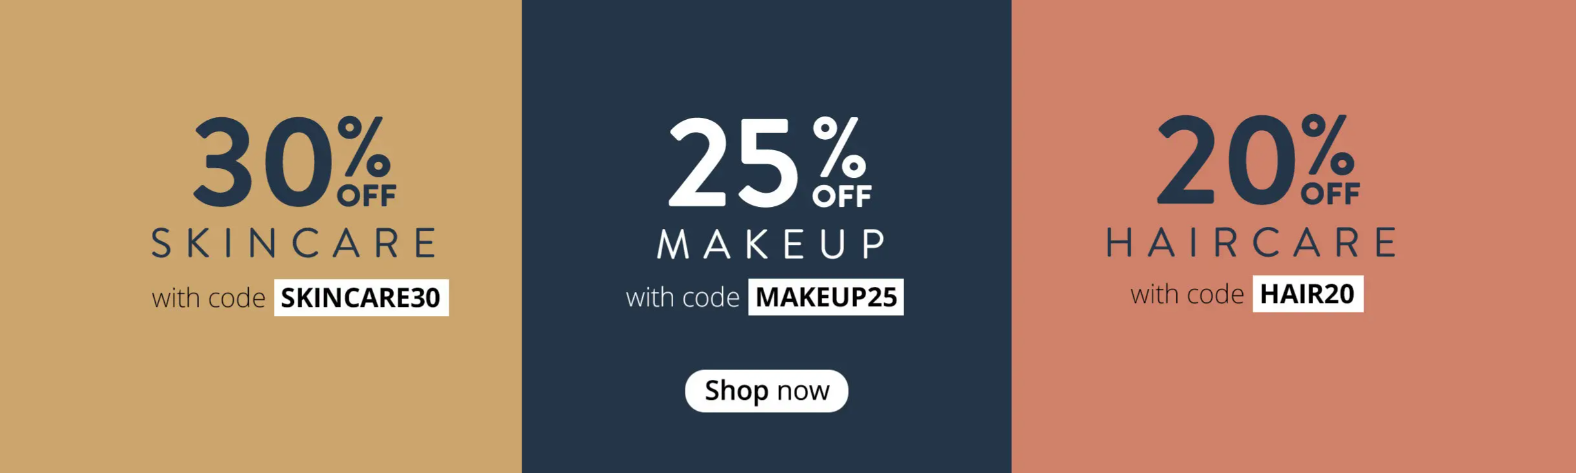 Extra 20-30% OFF skincare, makeup and haircare with coupons @ Feelunique